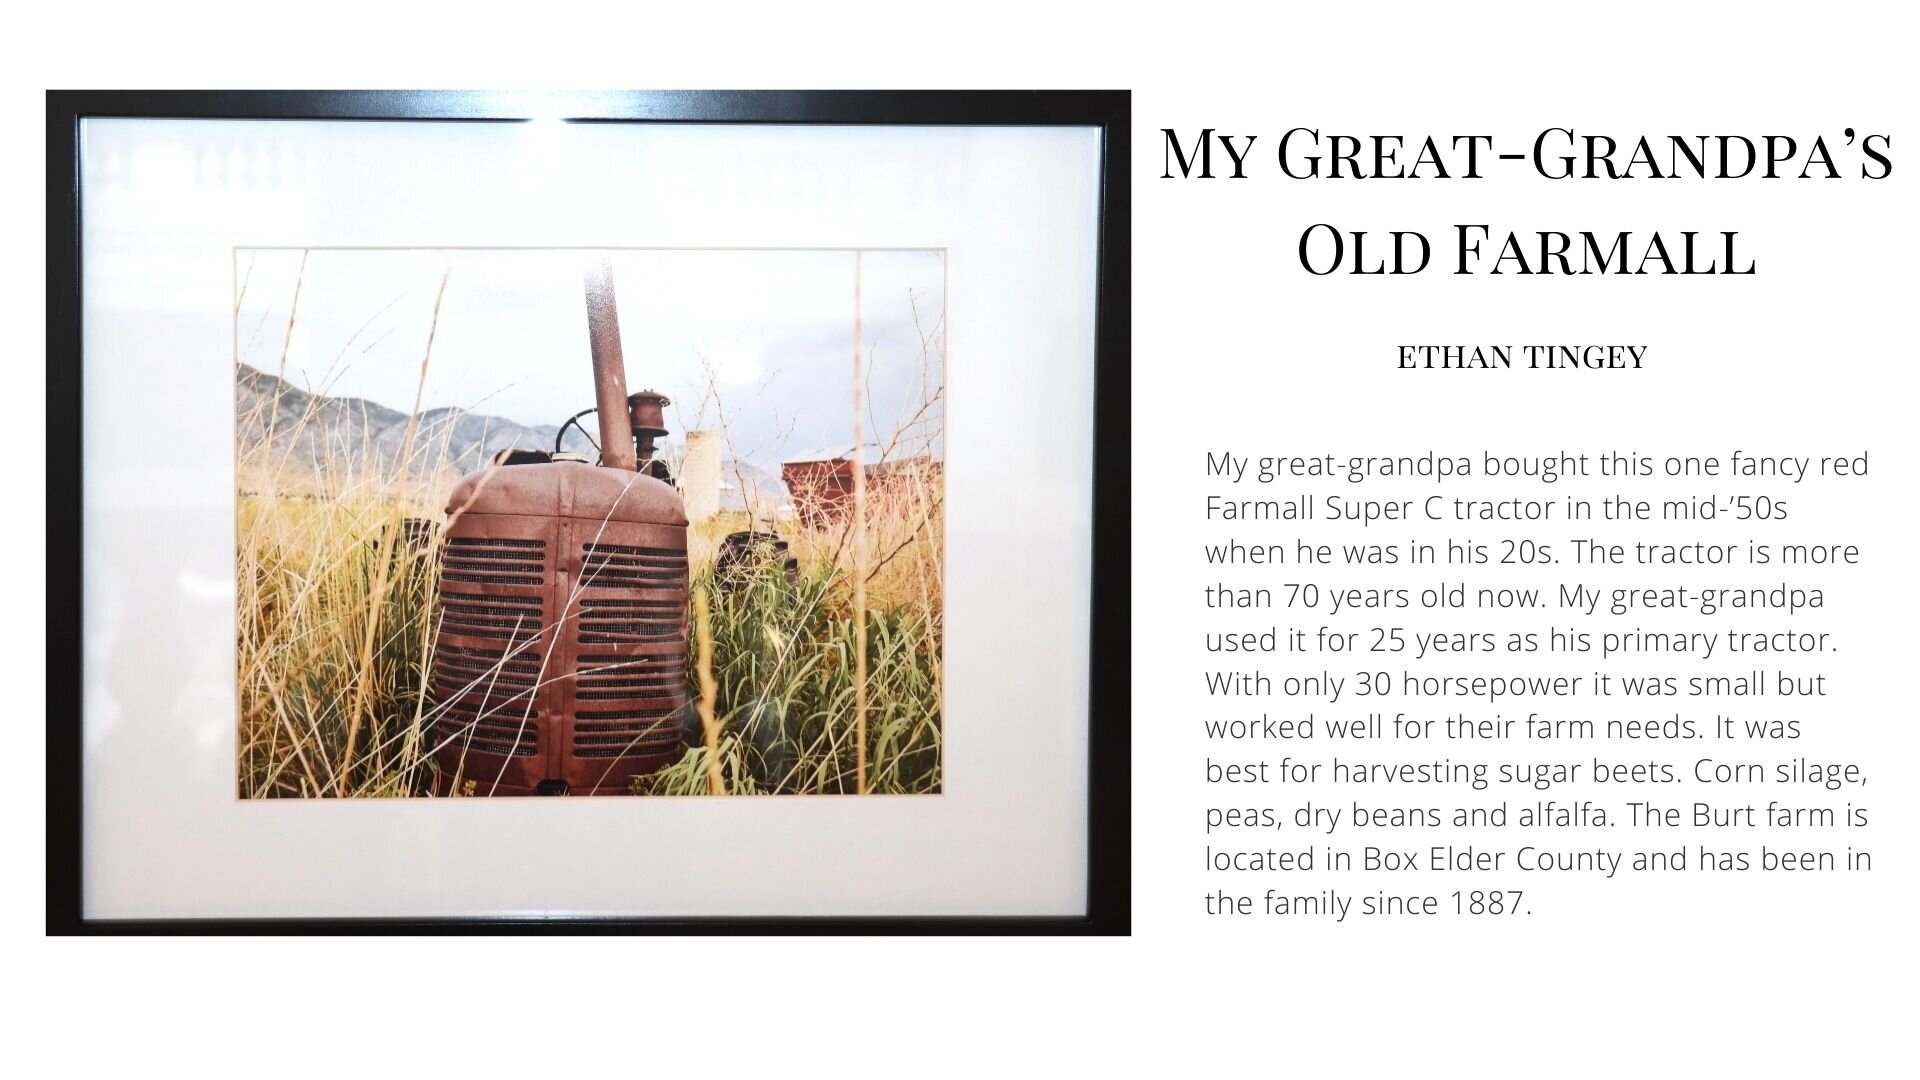 My Great-Grandpa's Old Farmall by Ethan Tingey